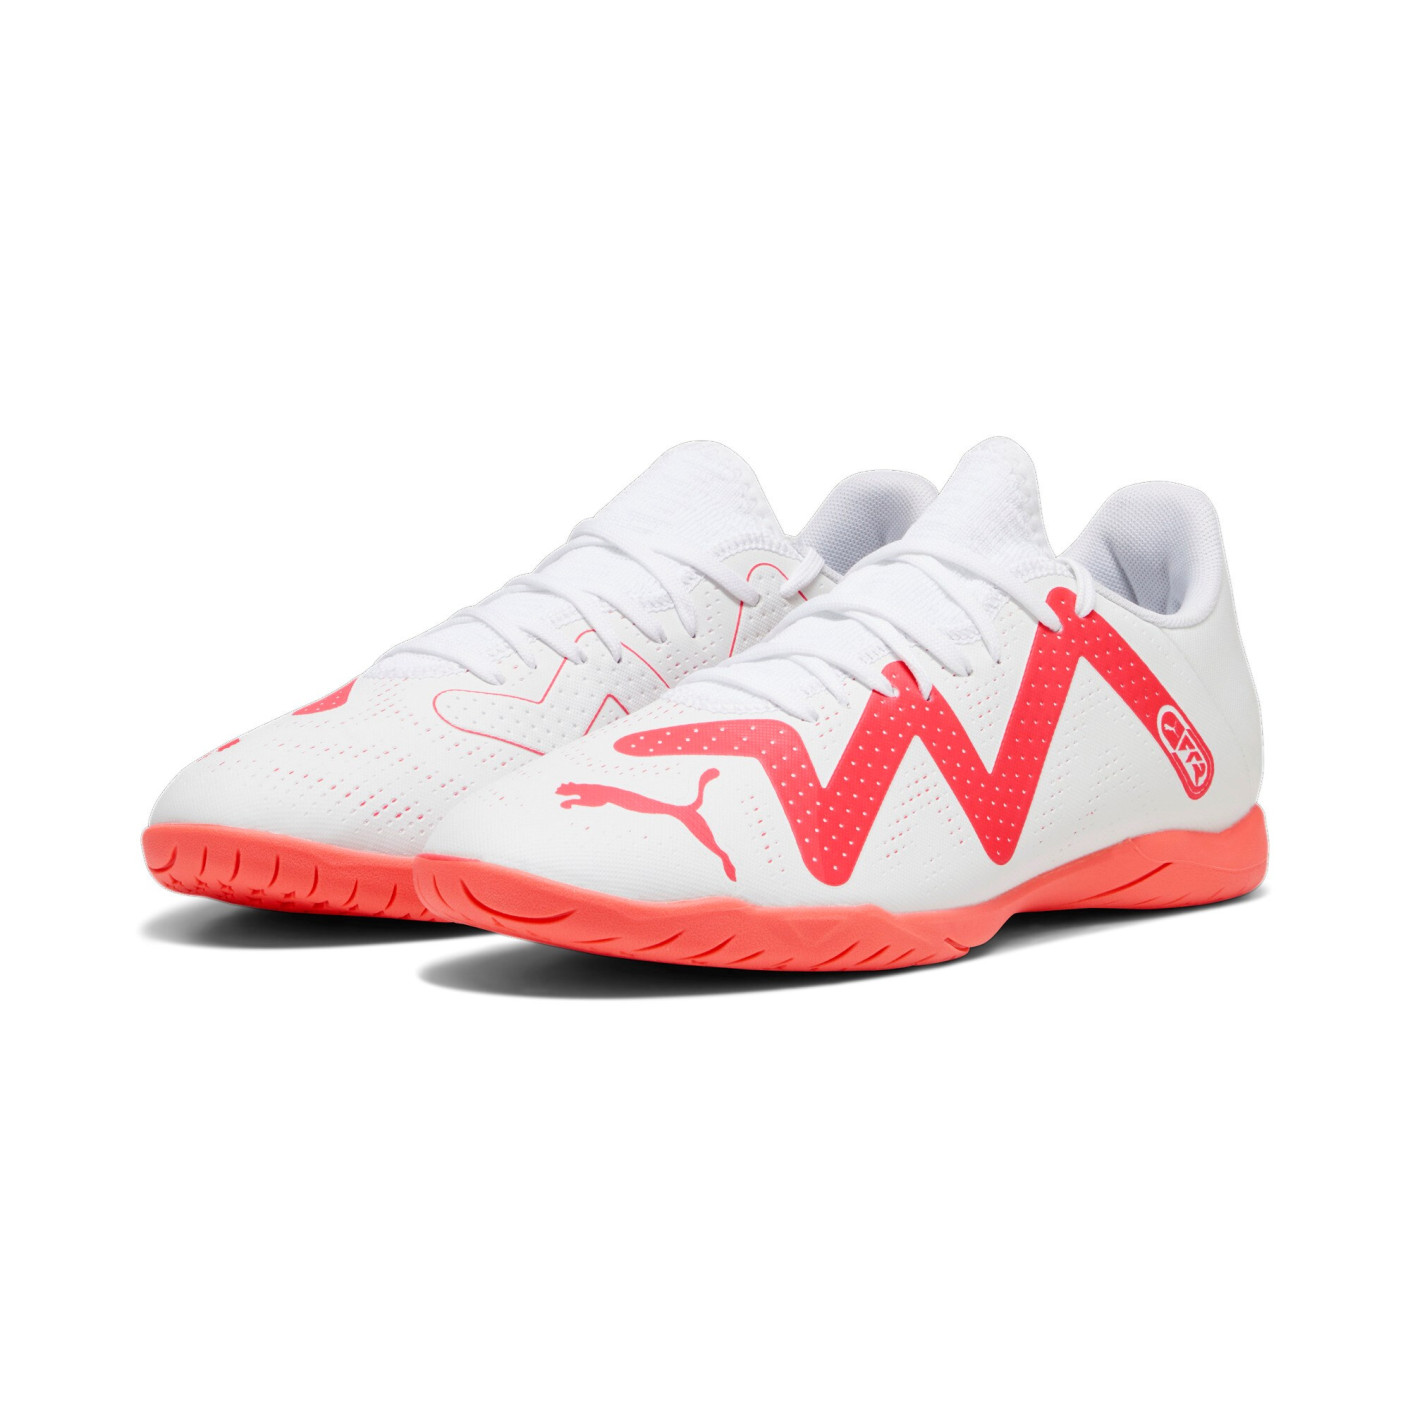 meester honing Airco PUMA Future Play Zaalvoetbalschoenen (IN) Wit Rood